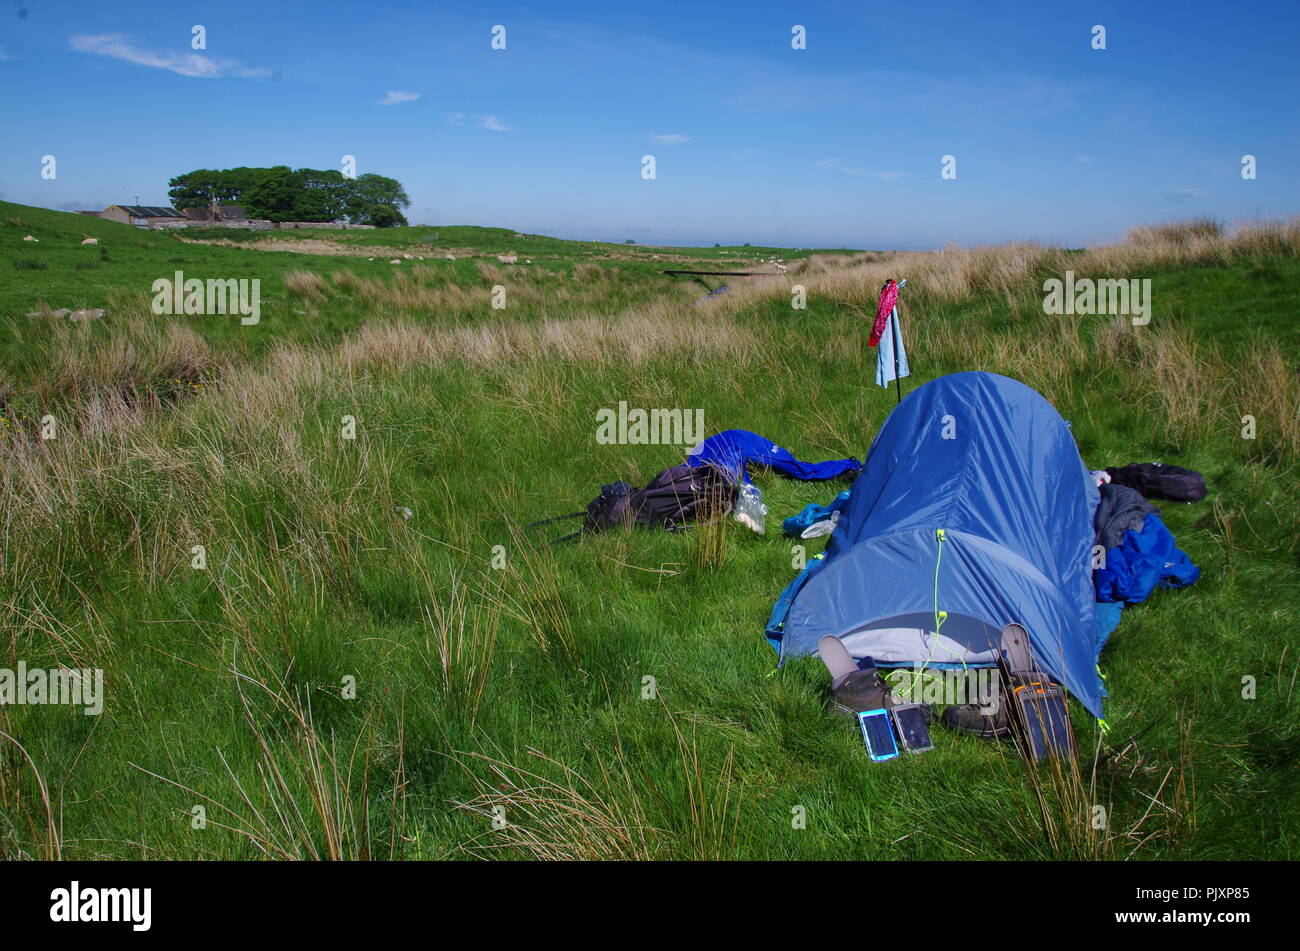 Wild camping. John o' groats (Duncansby head) to lands end. End to end trail. Caithness. Highlands. Scotland. UK Stock Photo